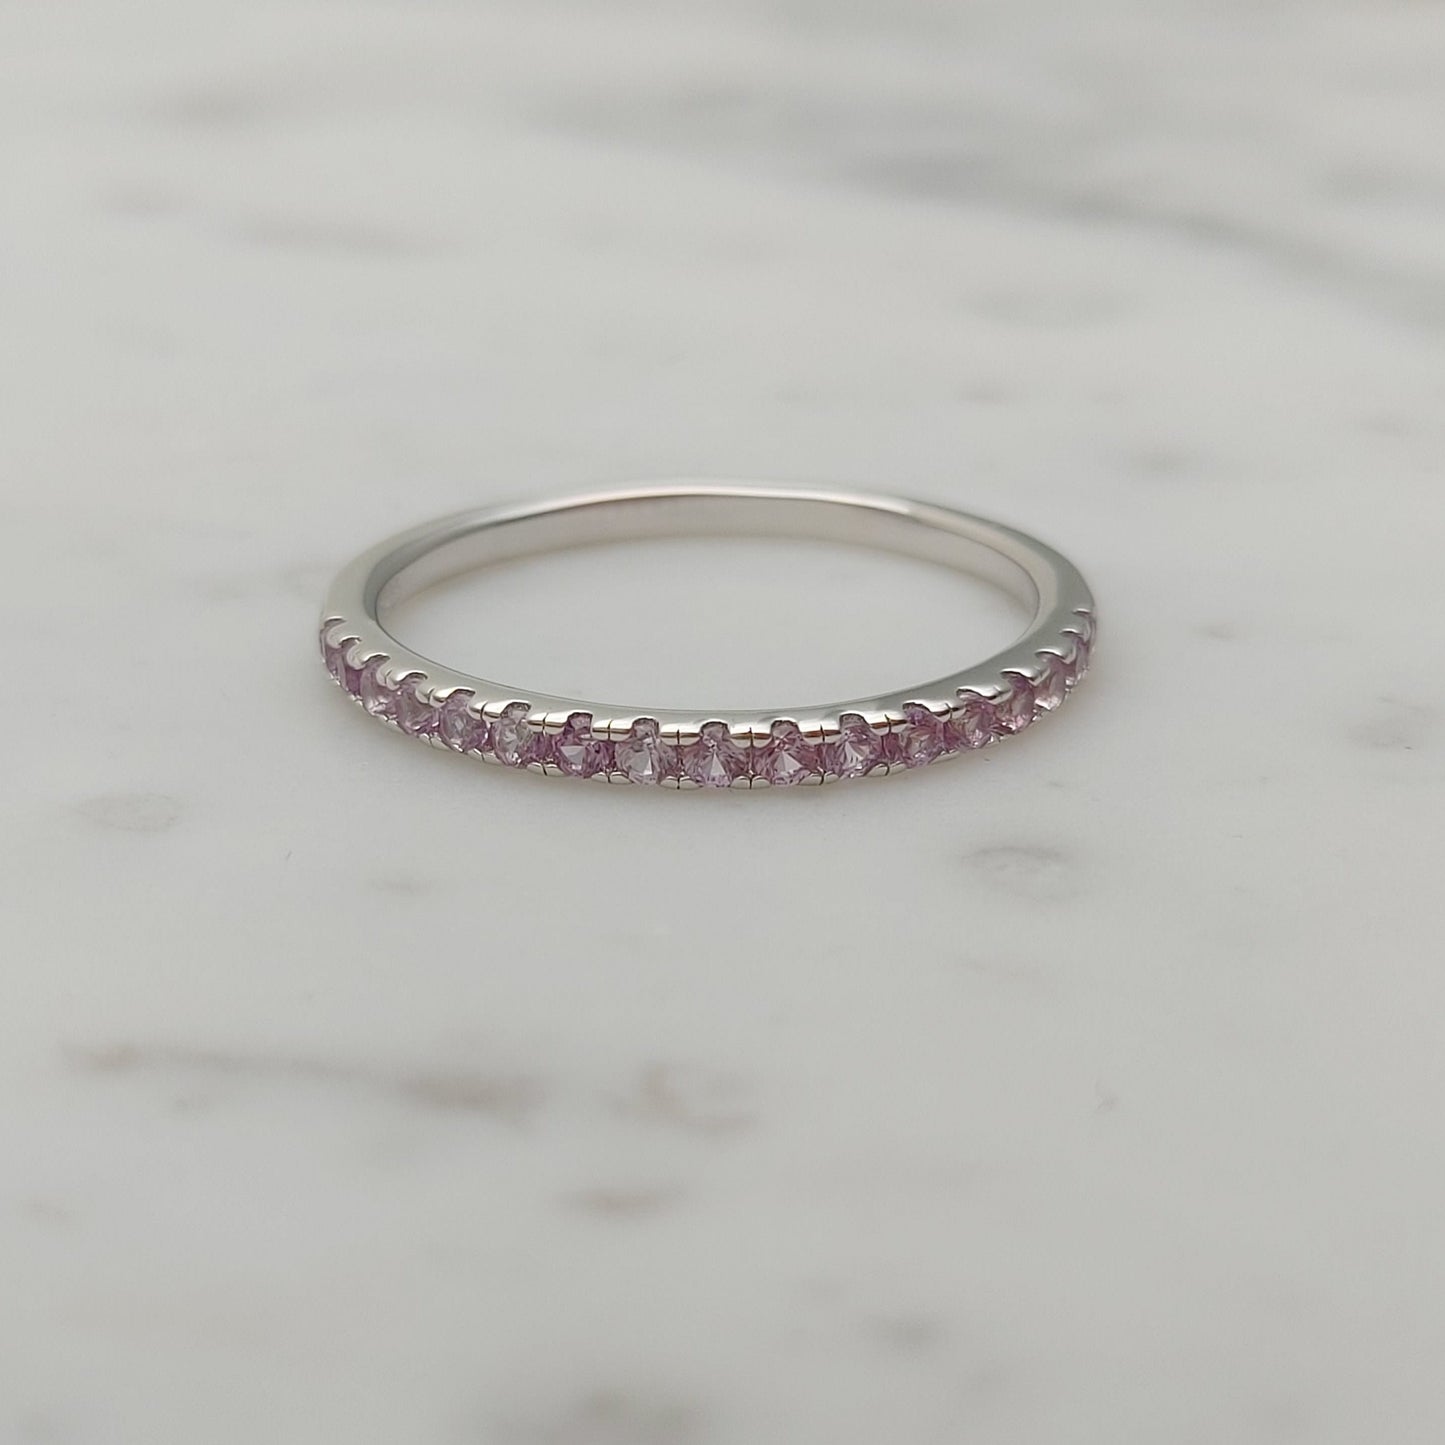 1.8mm wide Alexandrite Half Eternity ring in white gold or Silver - stacking ring - wedding band - handmade engagement ring